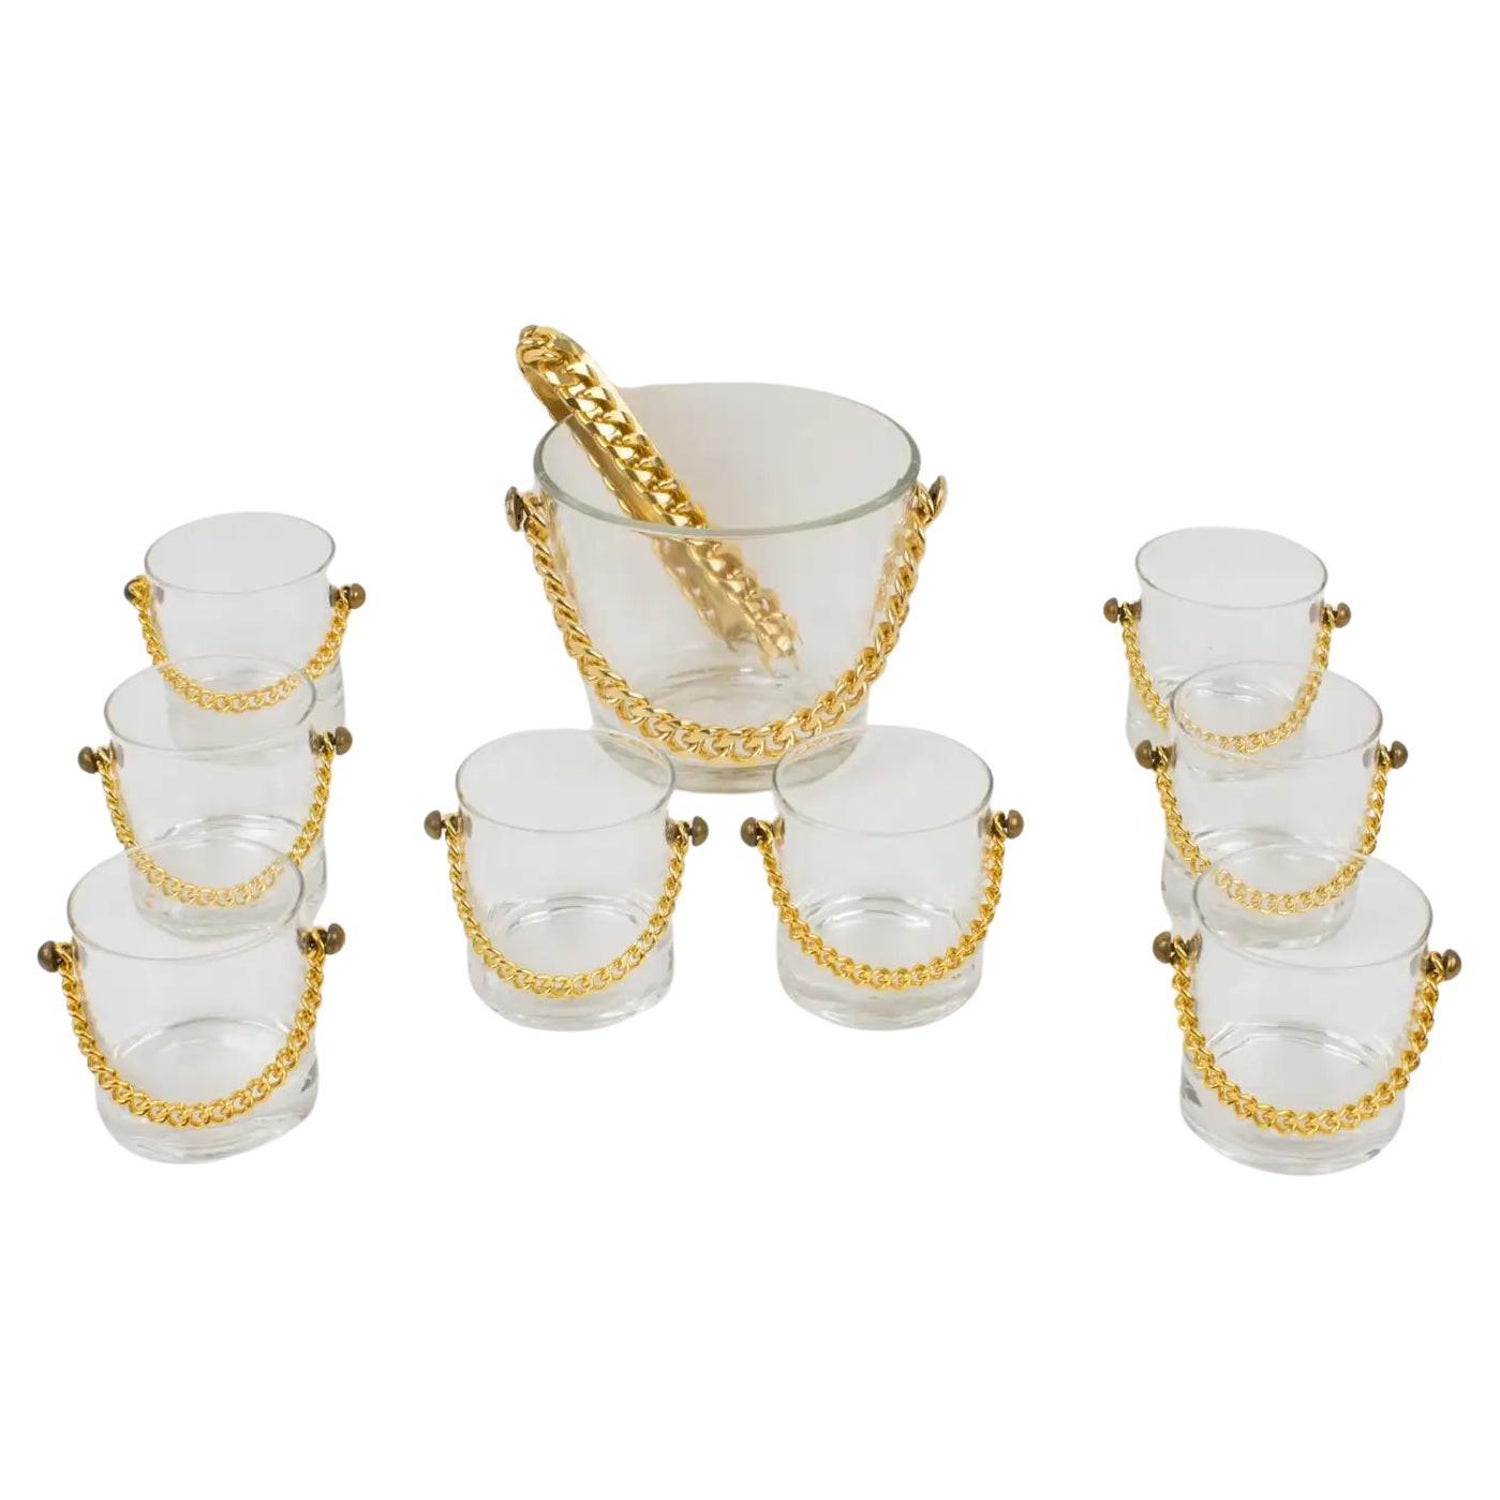 https://a.1stdibscdn.com/barware-cocktail-set-ice-bucket-and-8-glasses-with-gilded-chain-1980s-for-sale/f_16322/f_348652821687294847043/f_34865282_1687294847377_bg_processed.jpg?width=1500